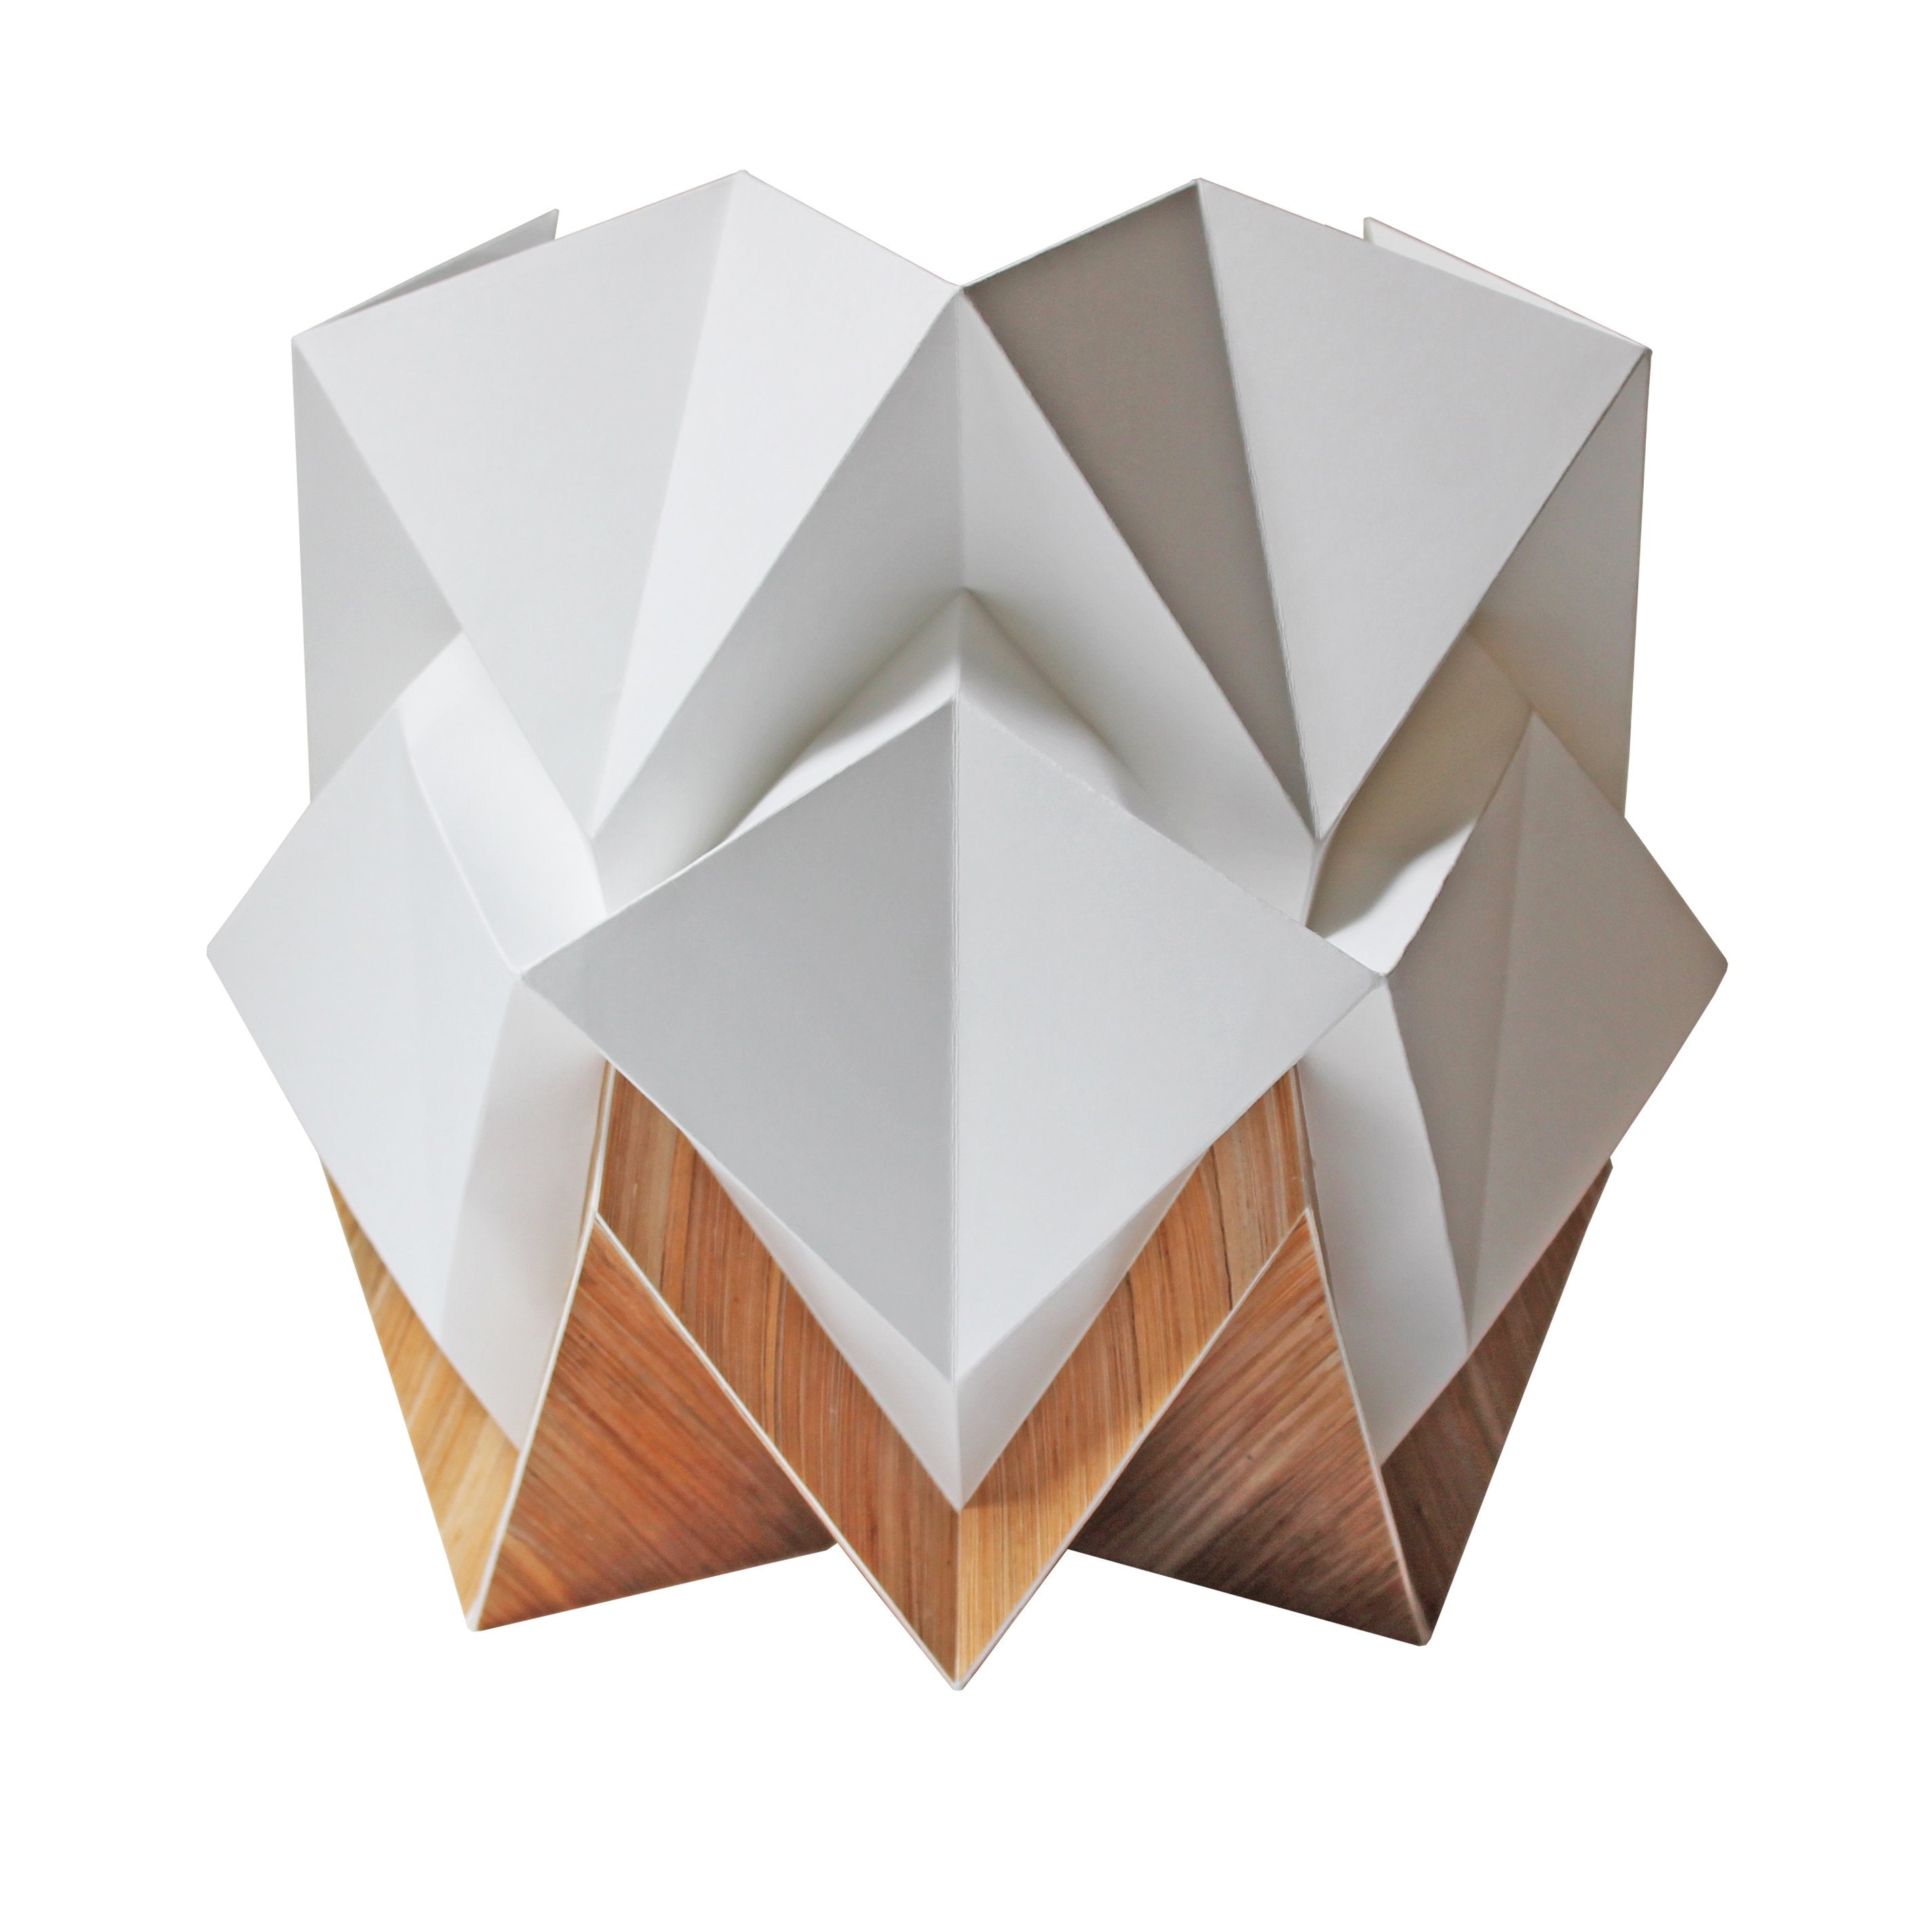 Lampe de table origami ecowood taille m